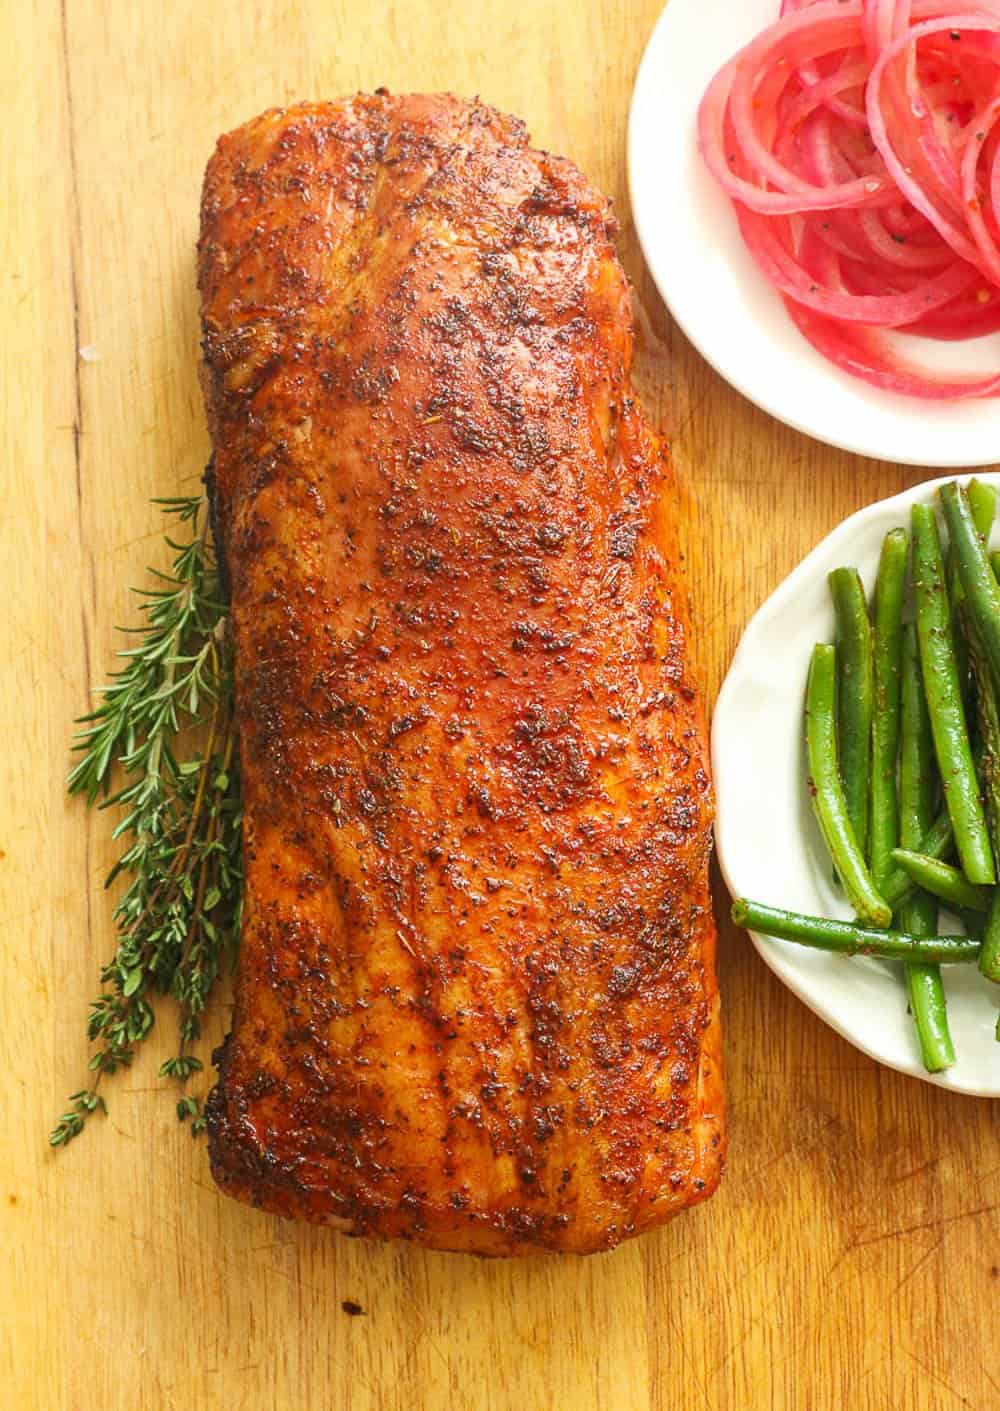 Smoked Pork Loin Served with Tomato Slices and Green Beans